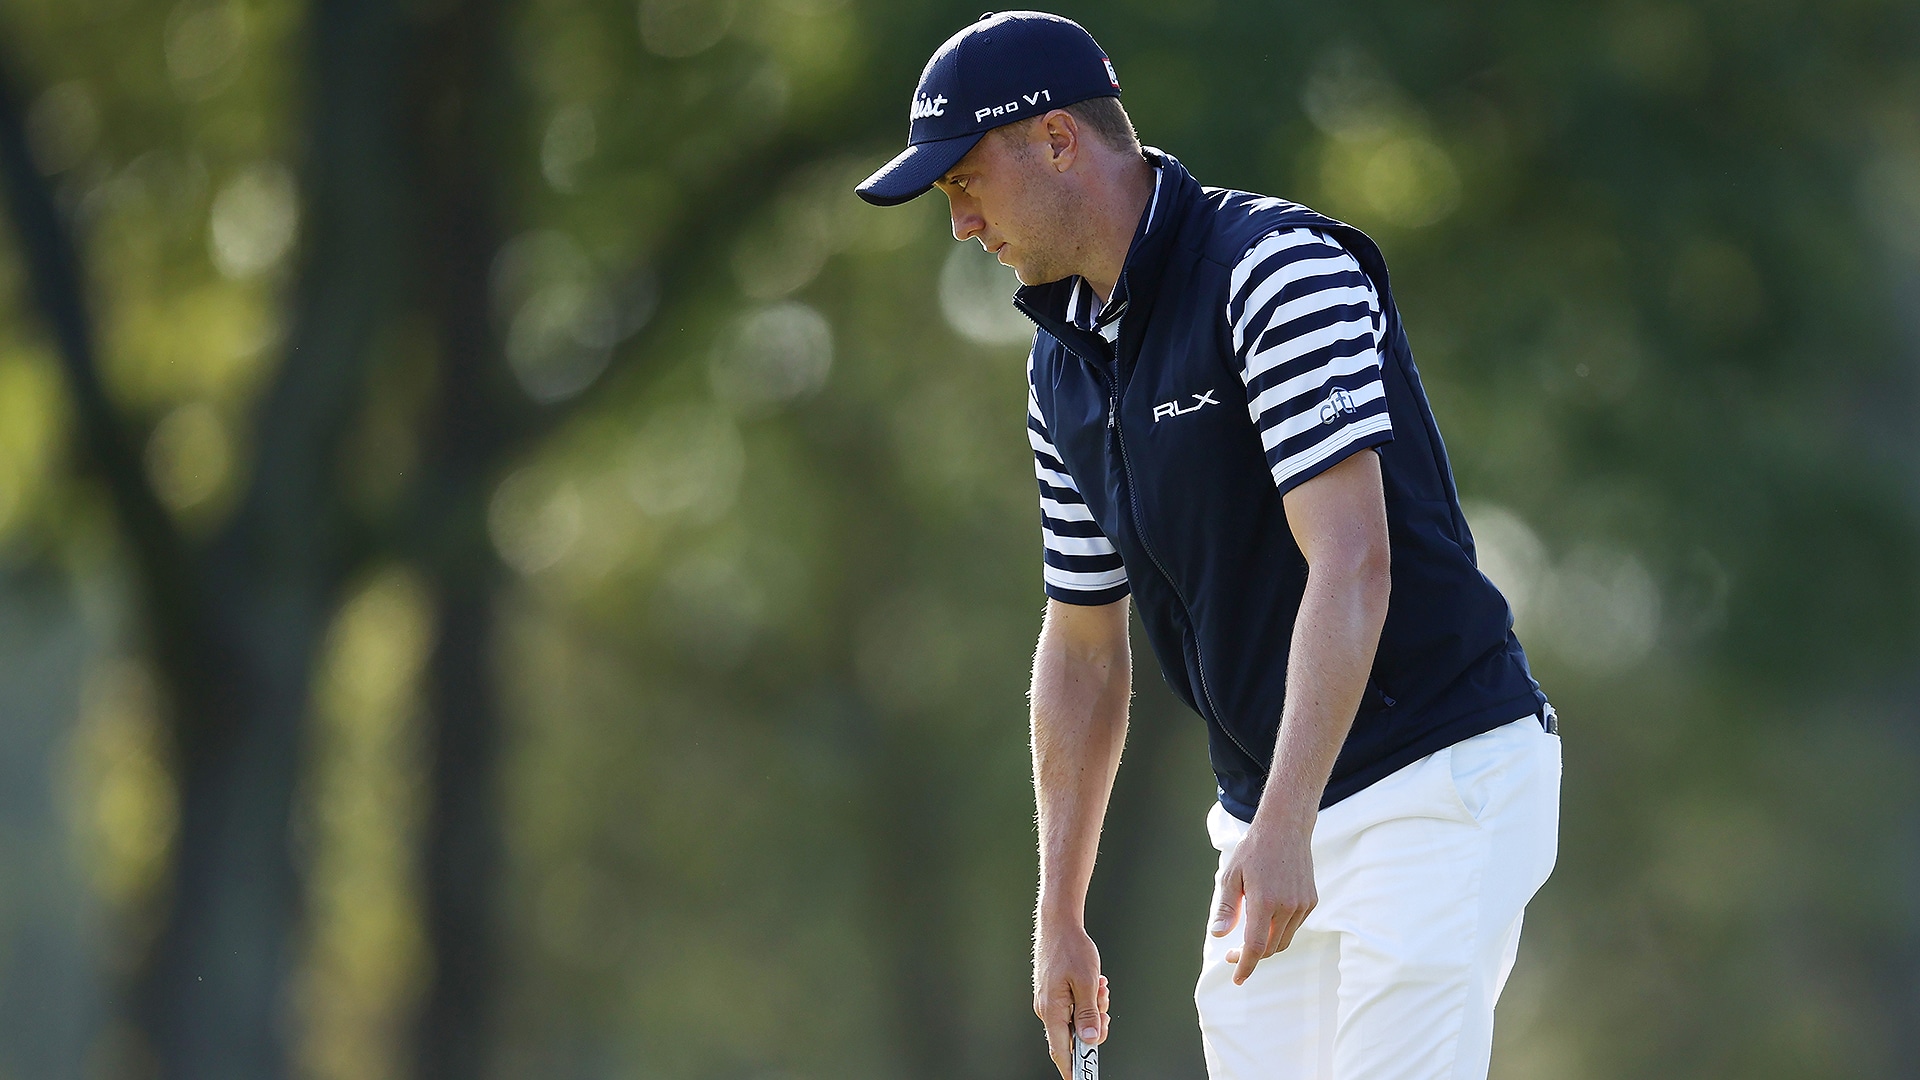 Justin Thomas fights through bad stretch on Friday to stay in contention at U.S. Open